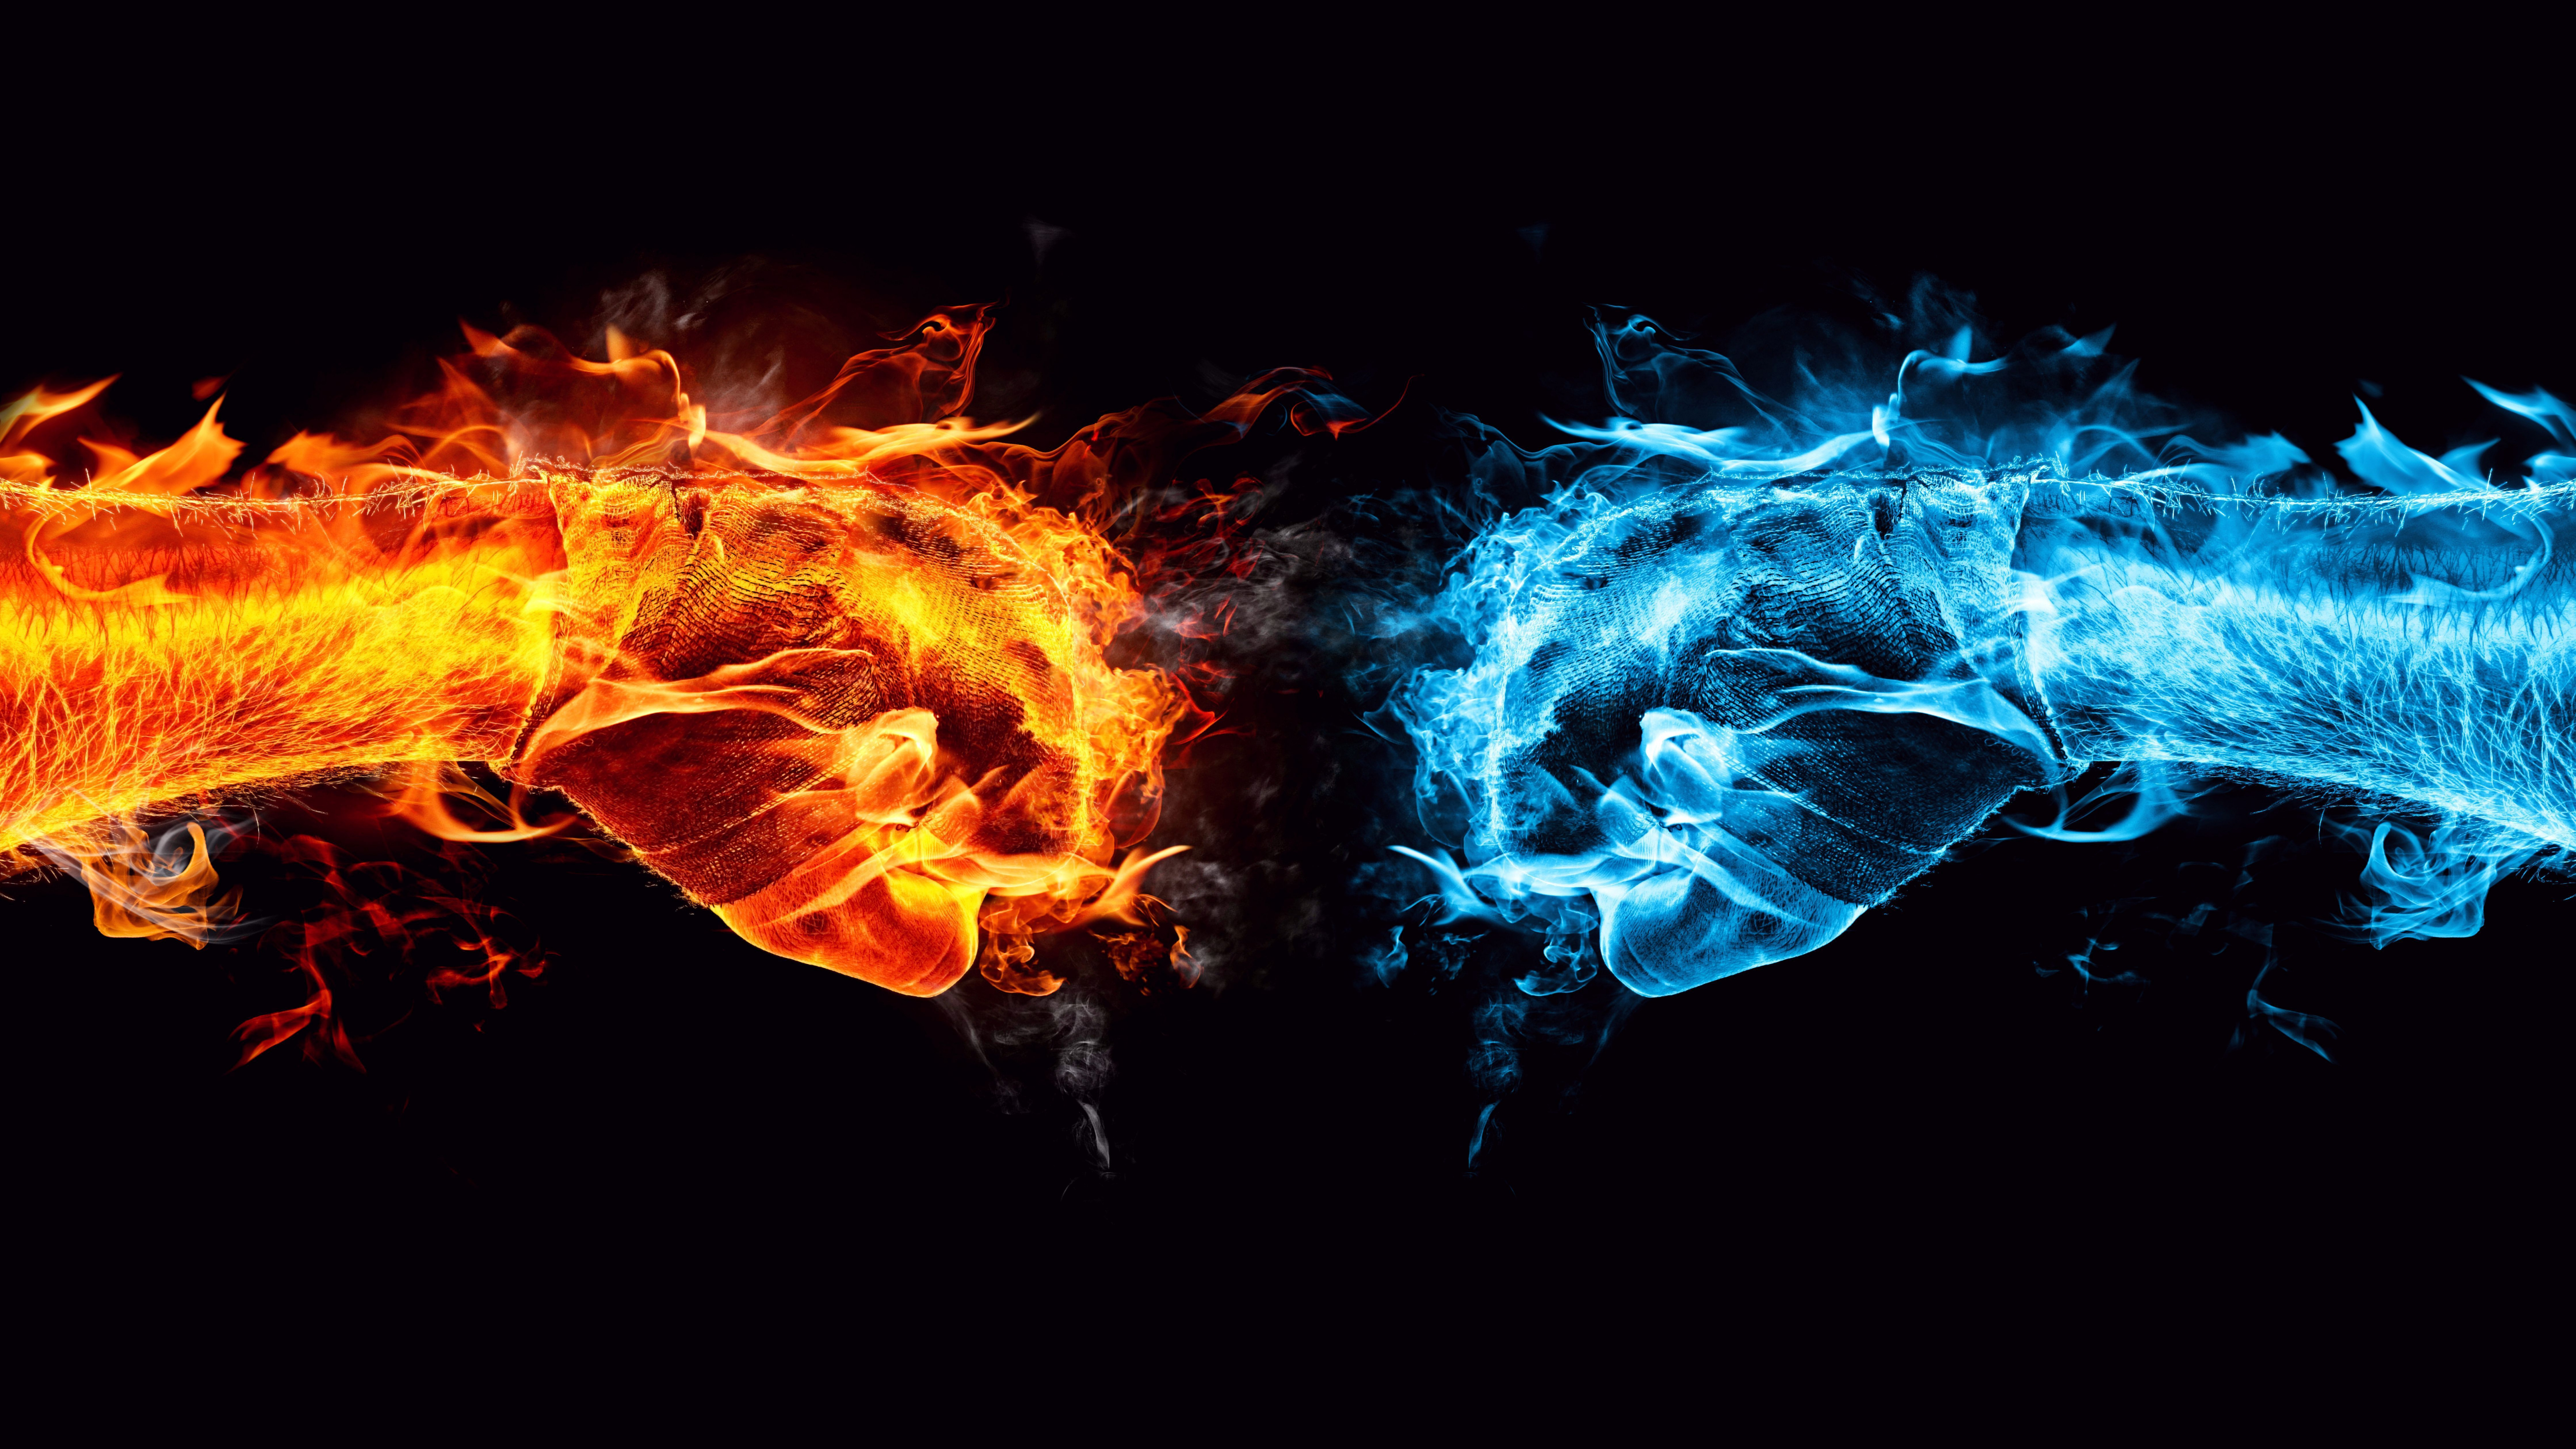 Blue and Orange Flame Illustration. Wallpaper in 7680x4320 Resolution